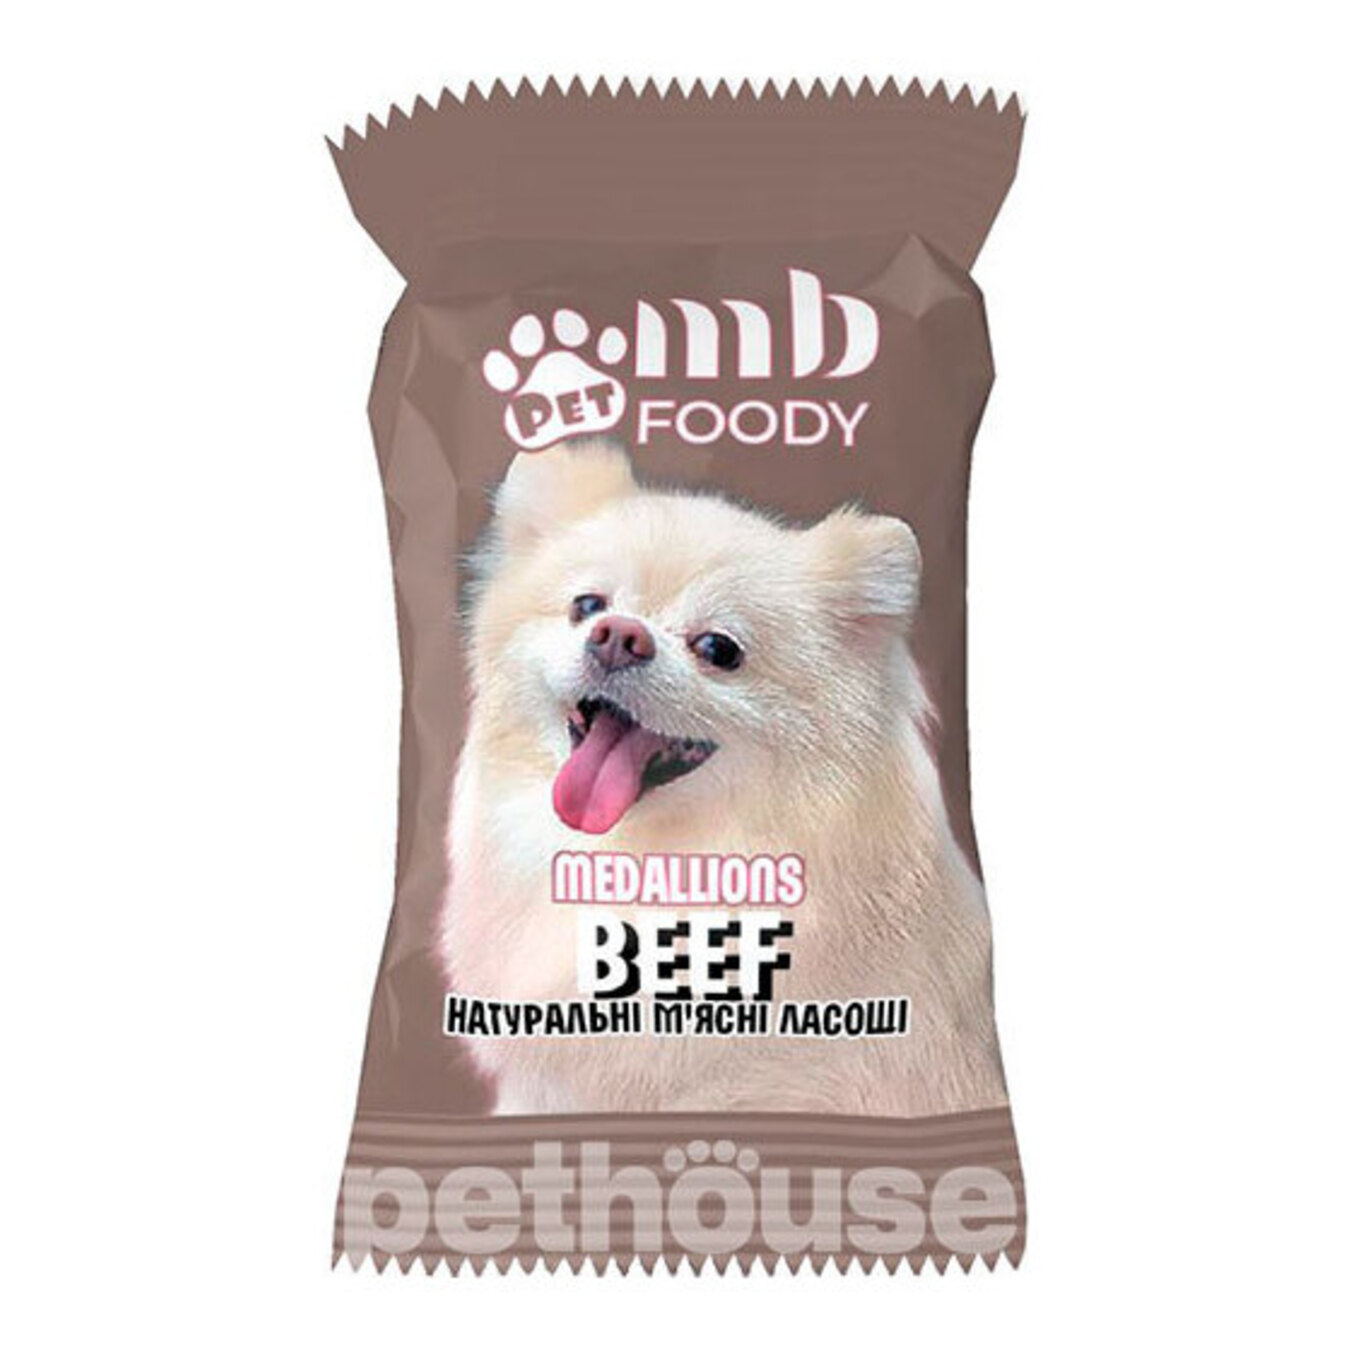 Treats for dogs Mb foody Medallions Game 4g